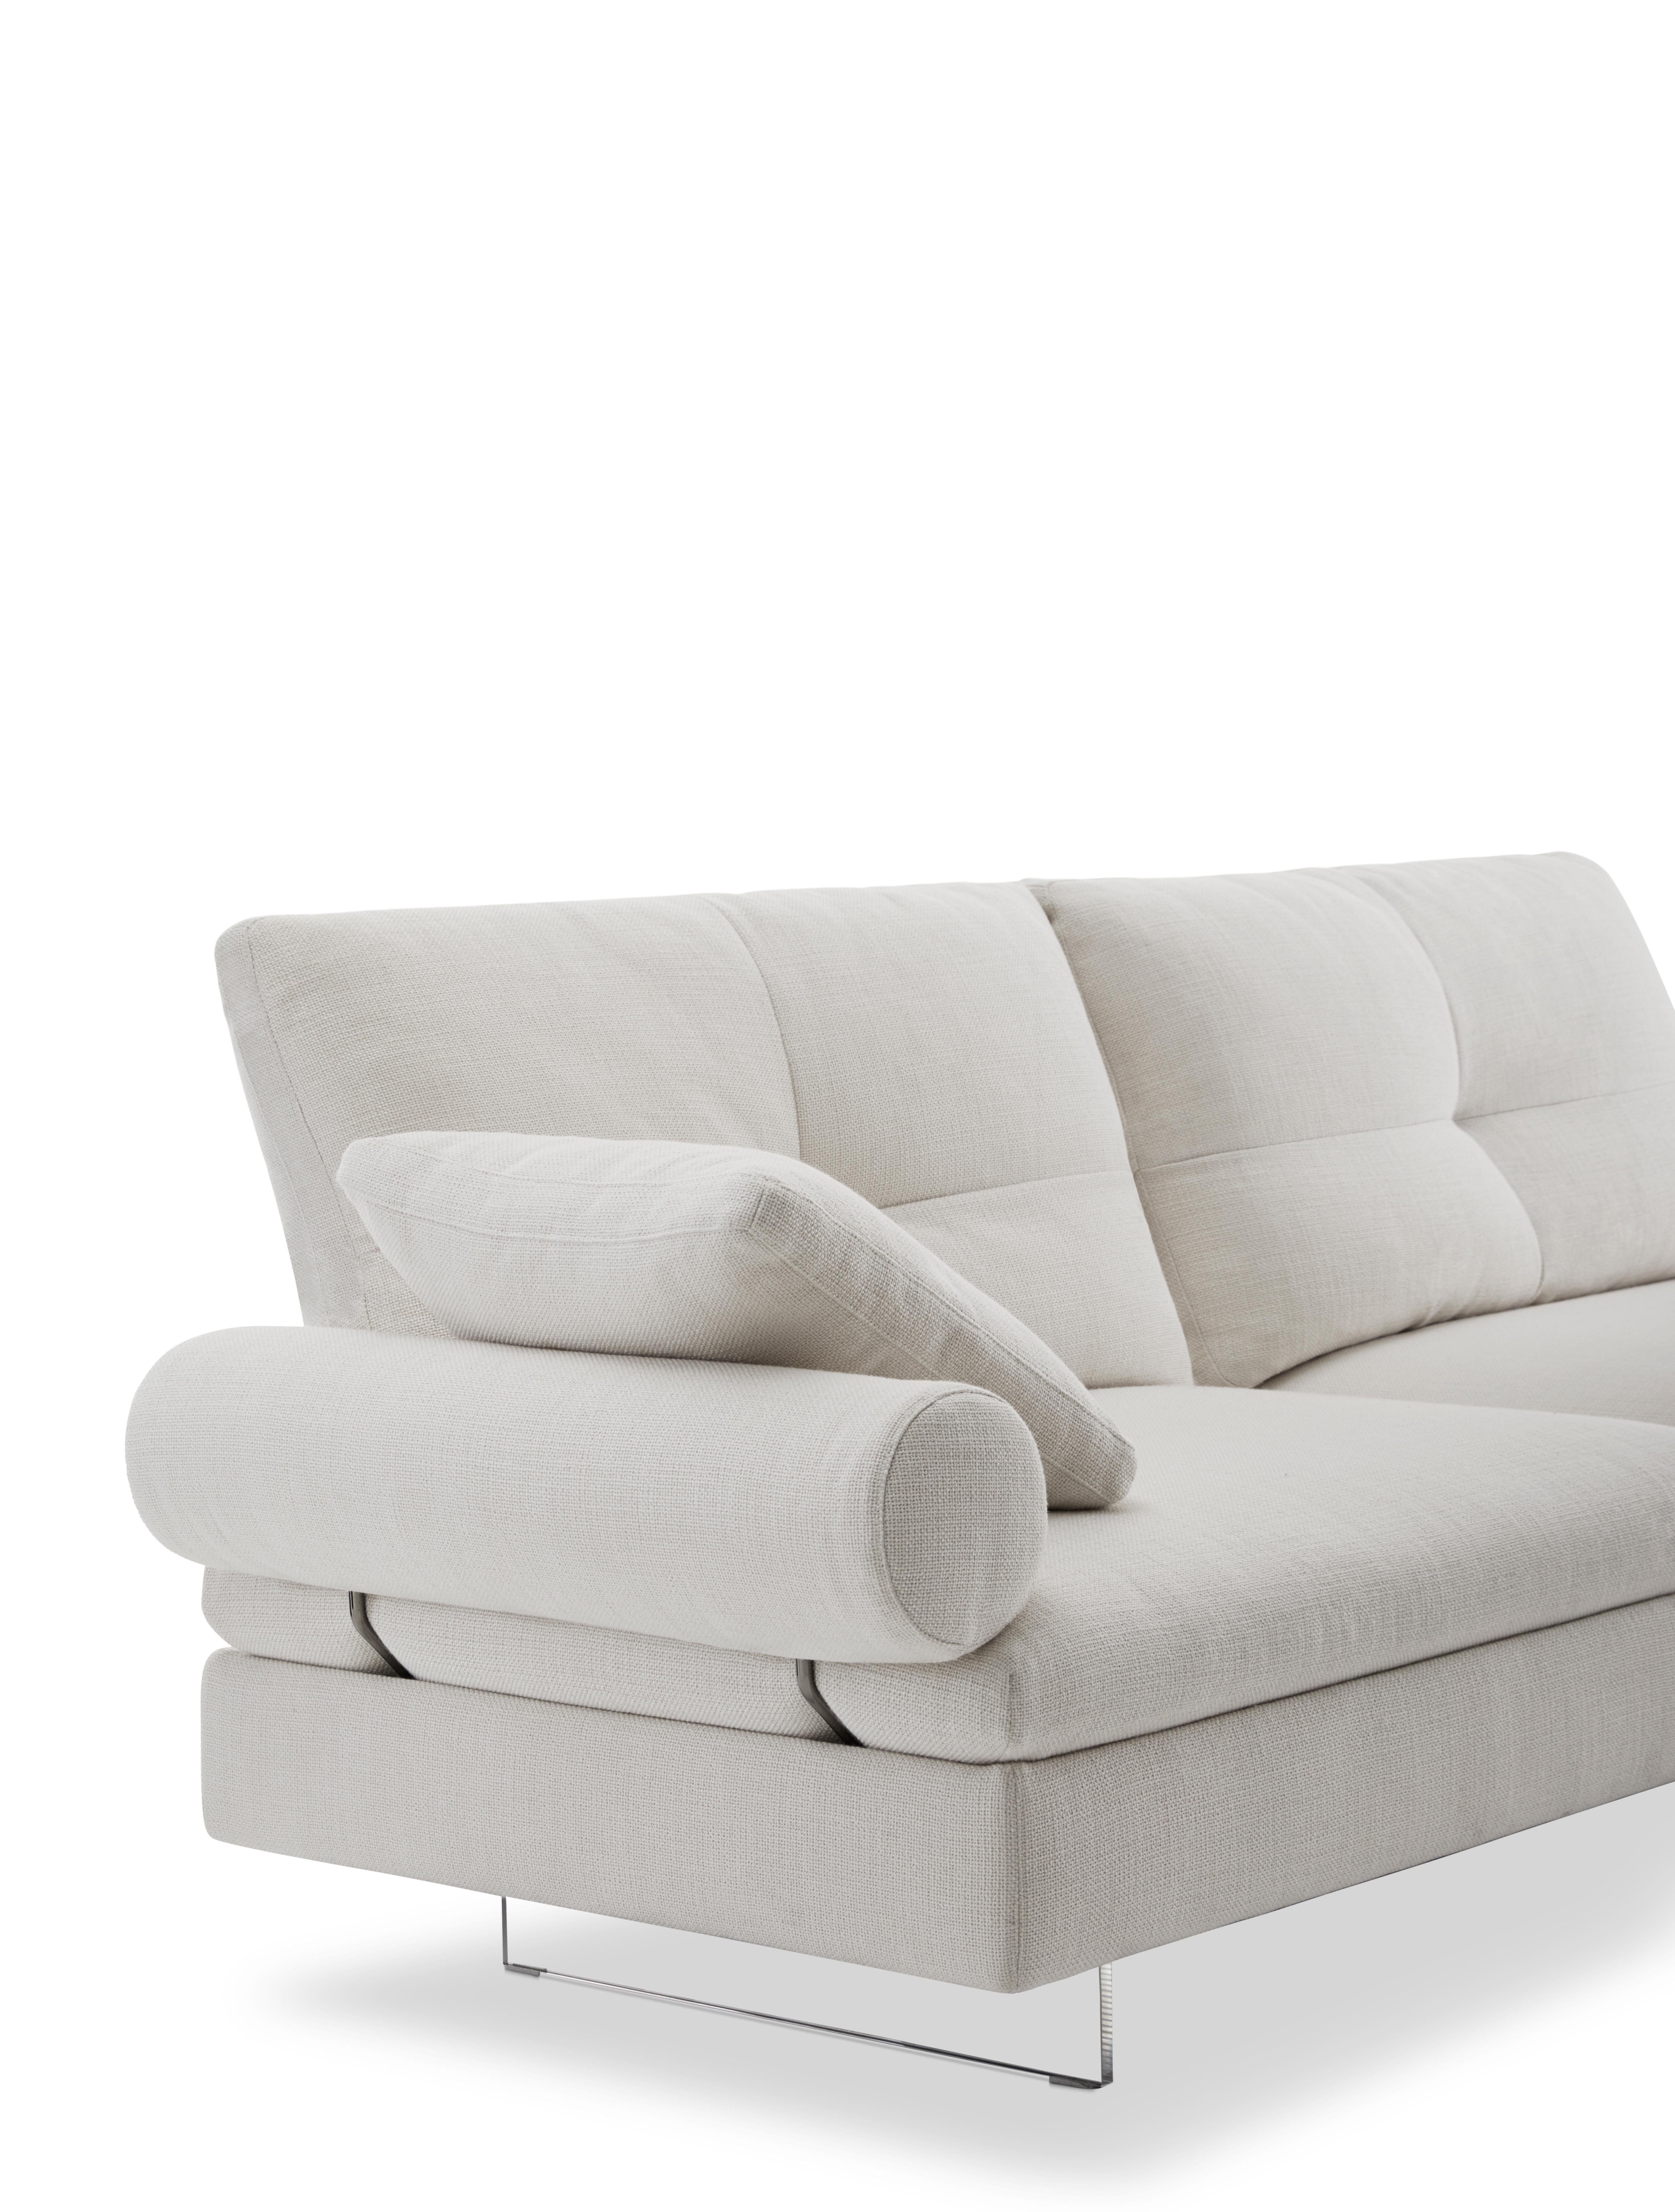 Modern Limes New 88 Small Sofa in Beige Upholstery with Roll Armrest by Sergio Bicego For Sale